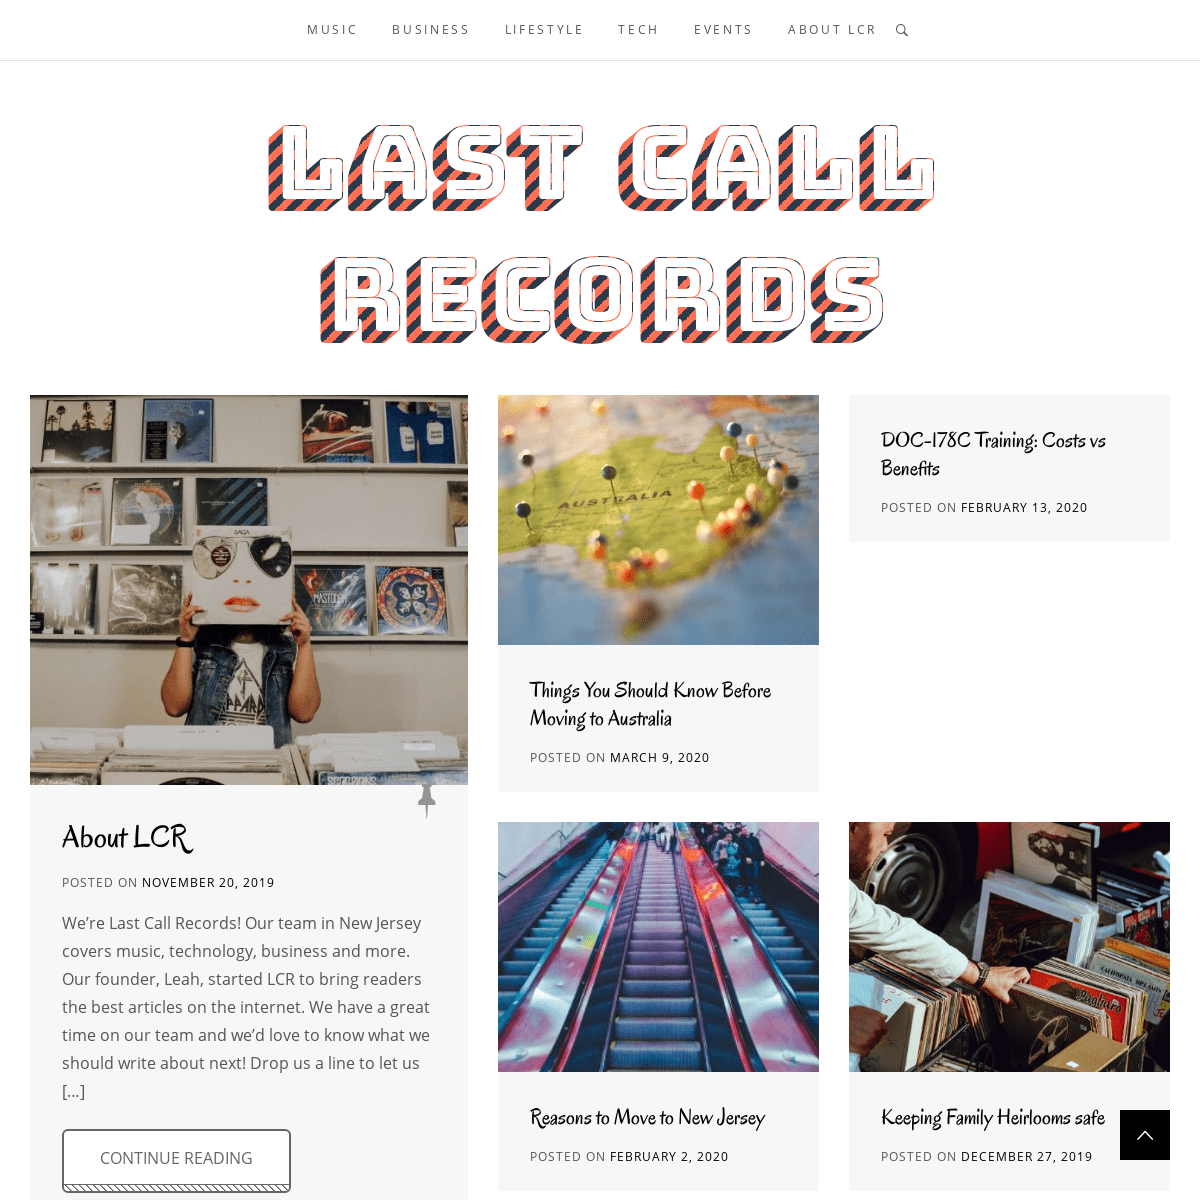 A complete backup of lastcallrecords.com